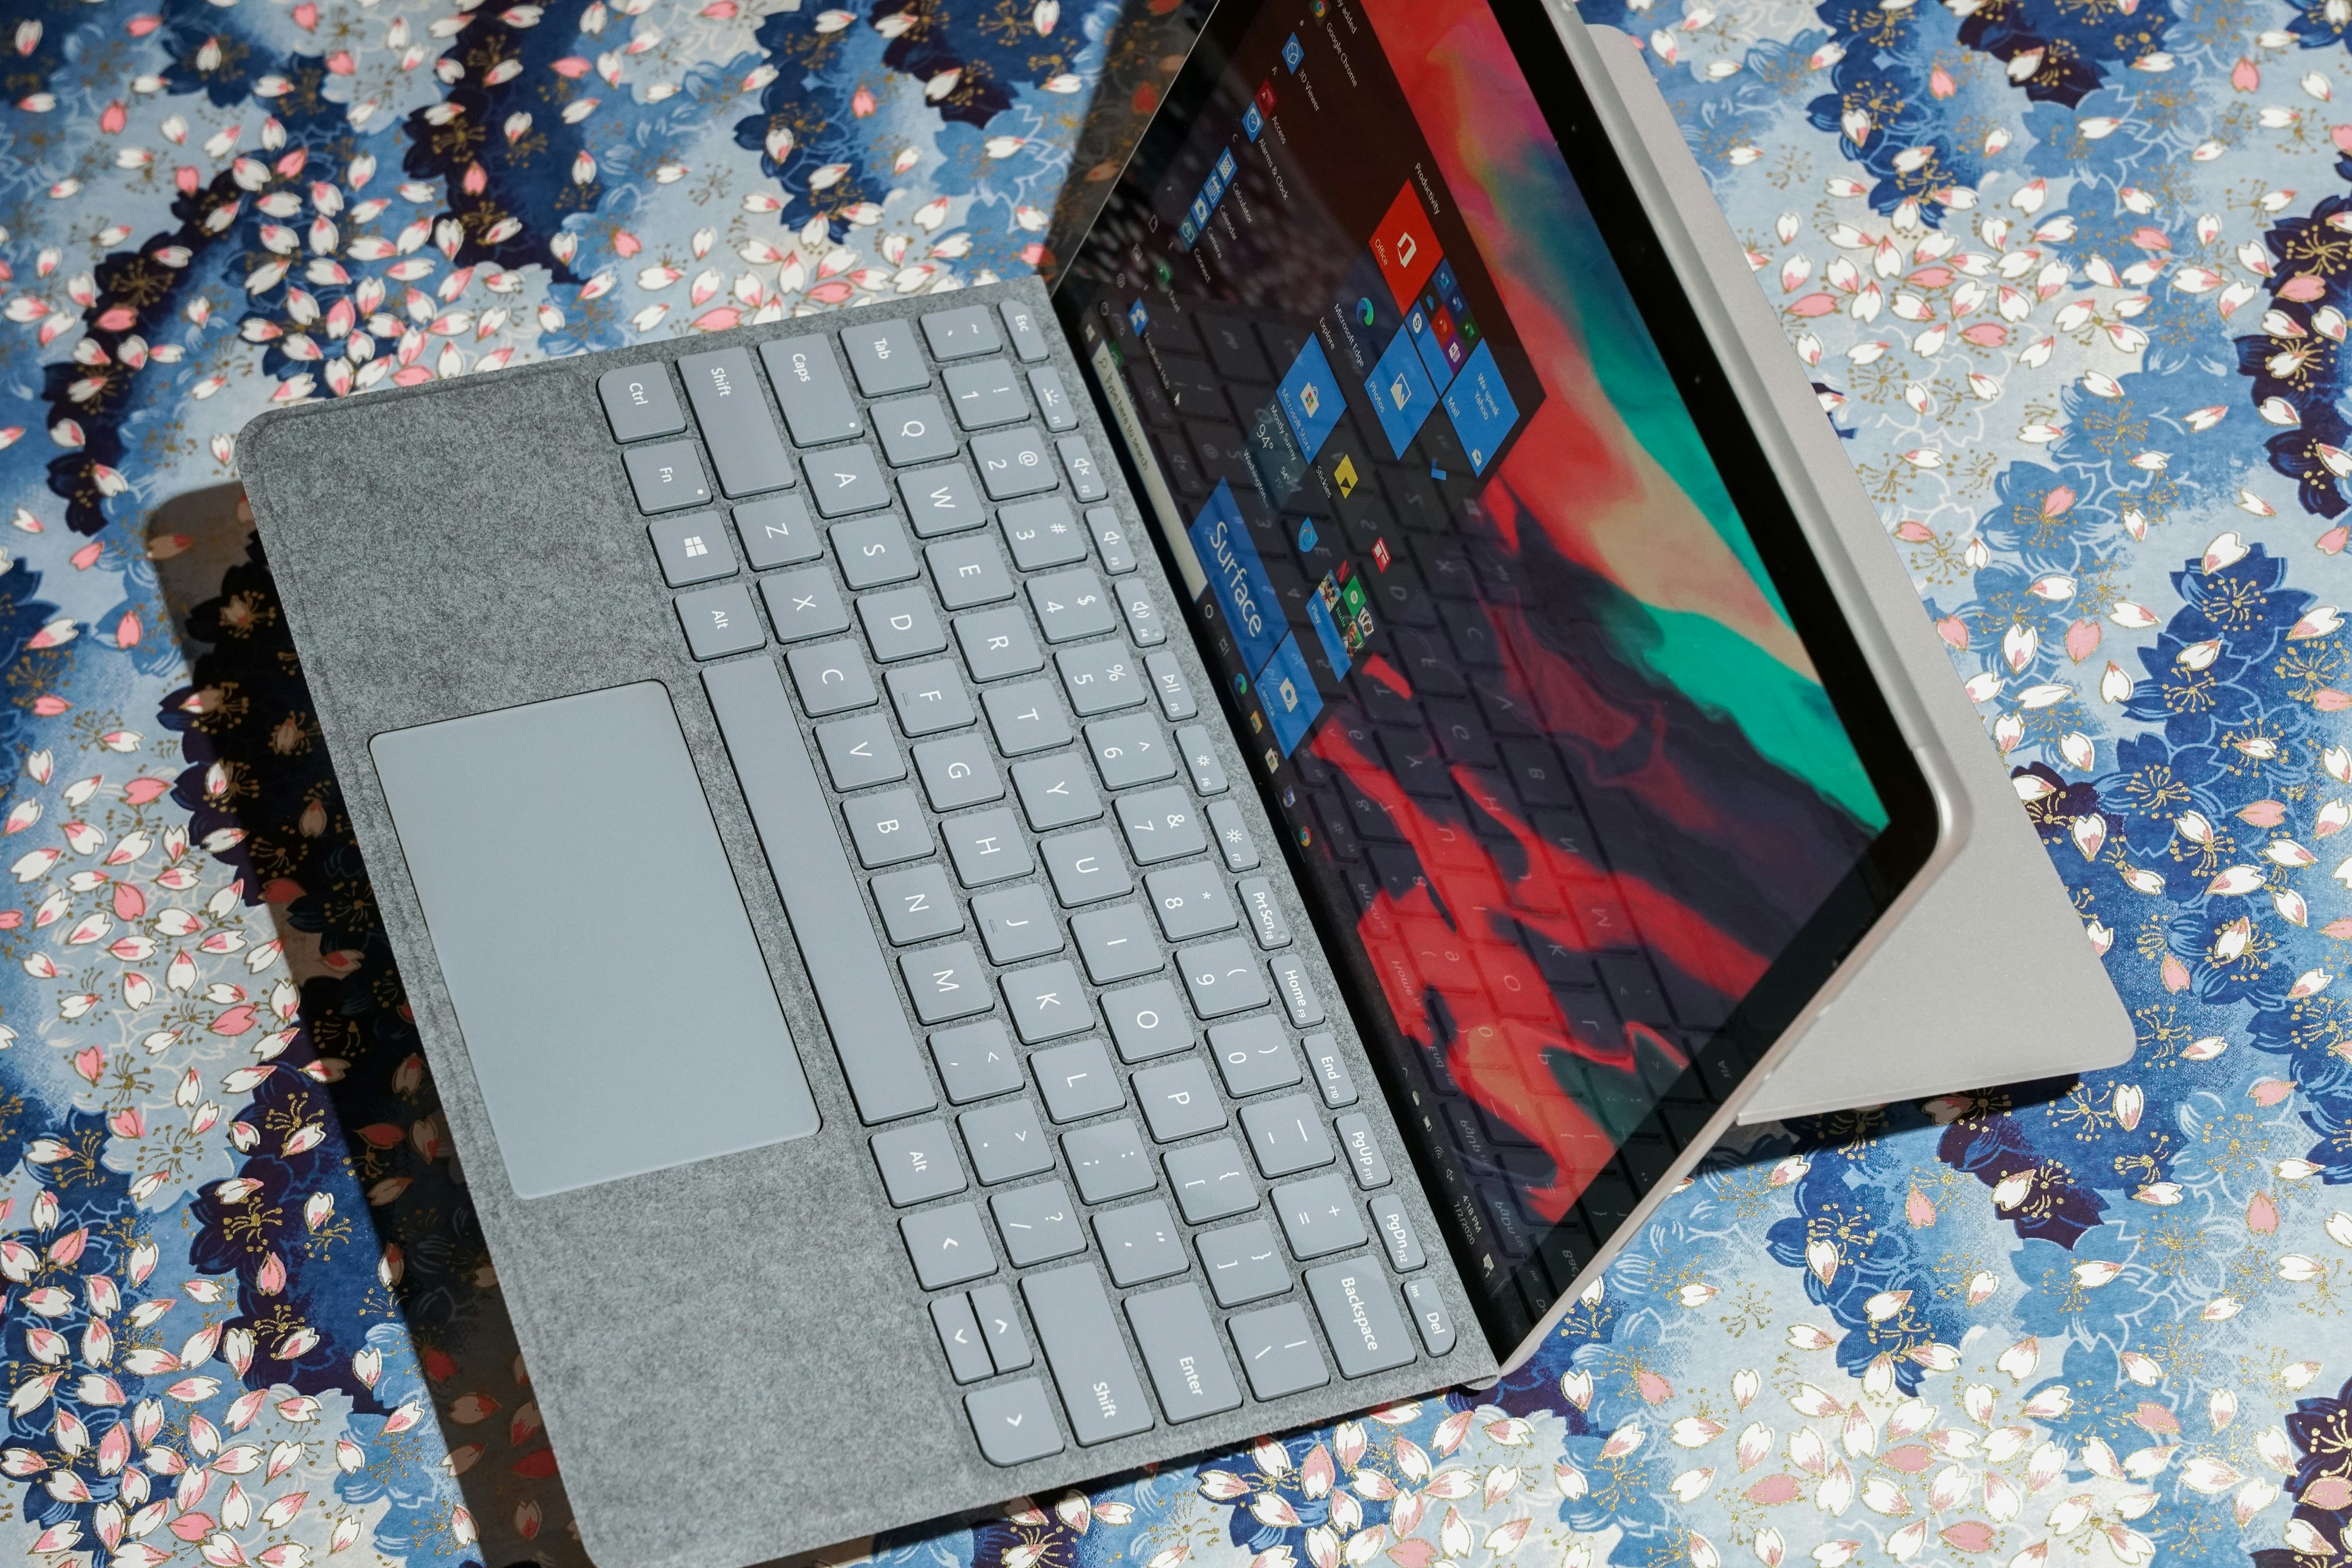 Microsoft Surface Go 2 Review 2020: A Small, But Mighty Laptop